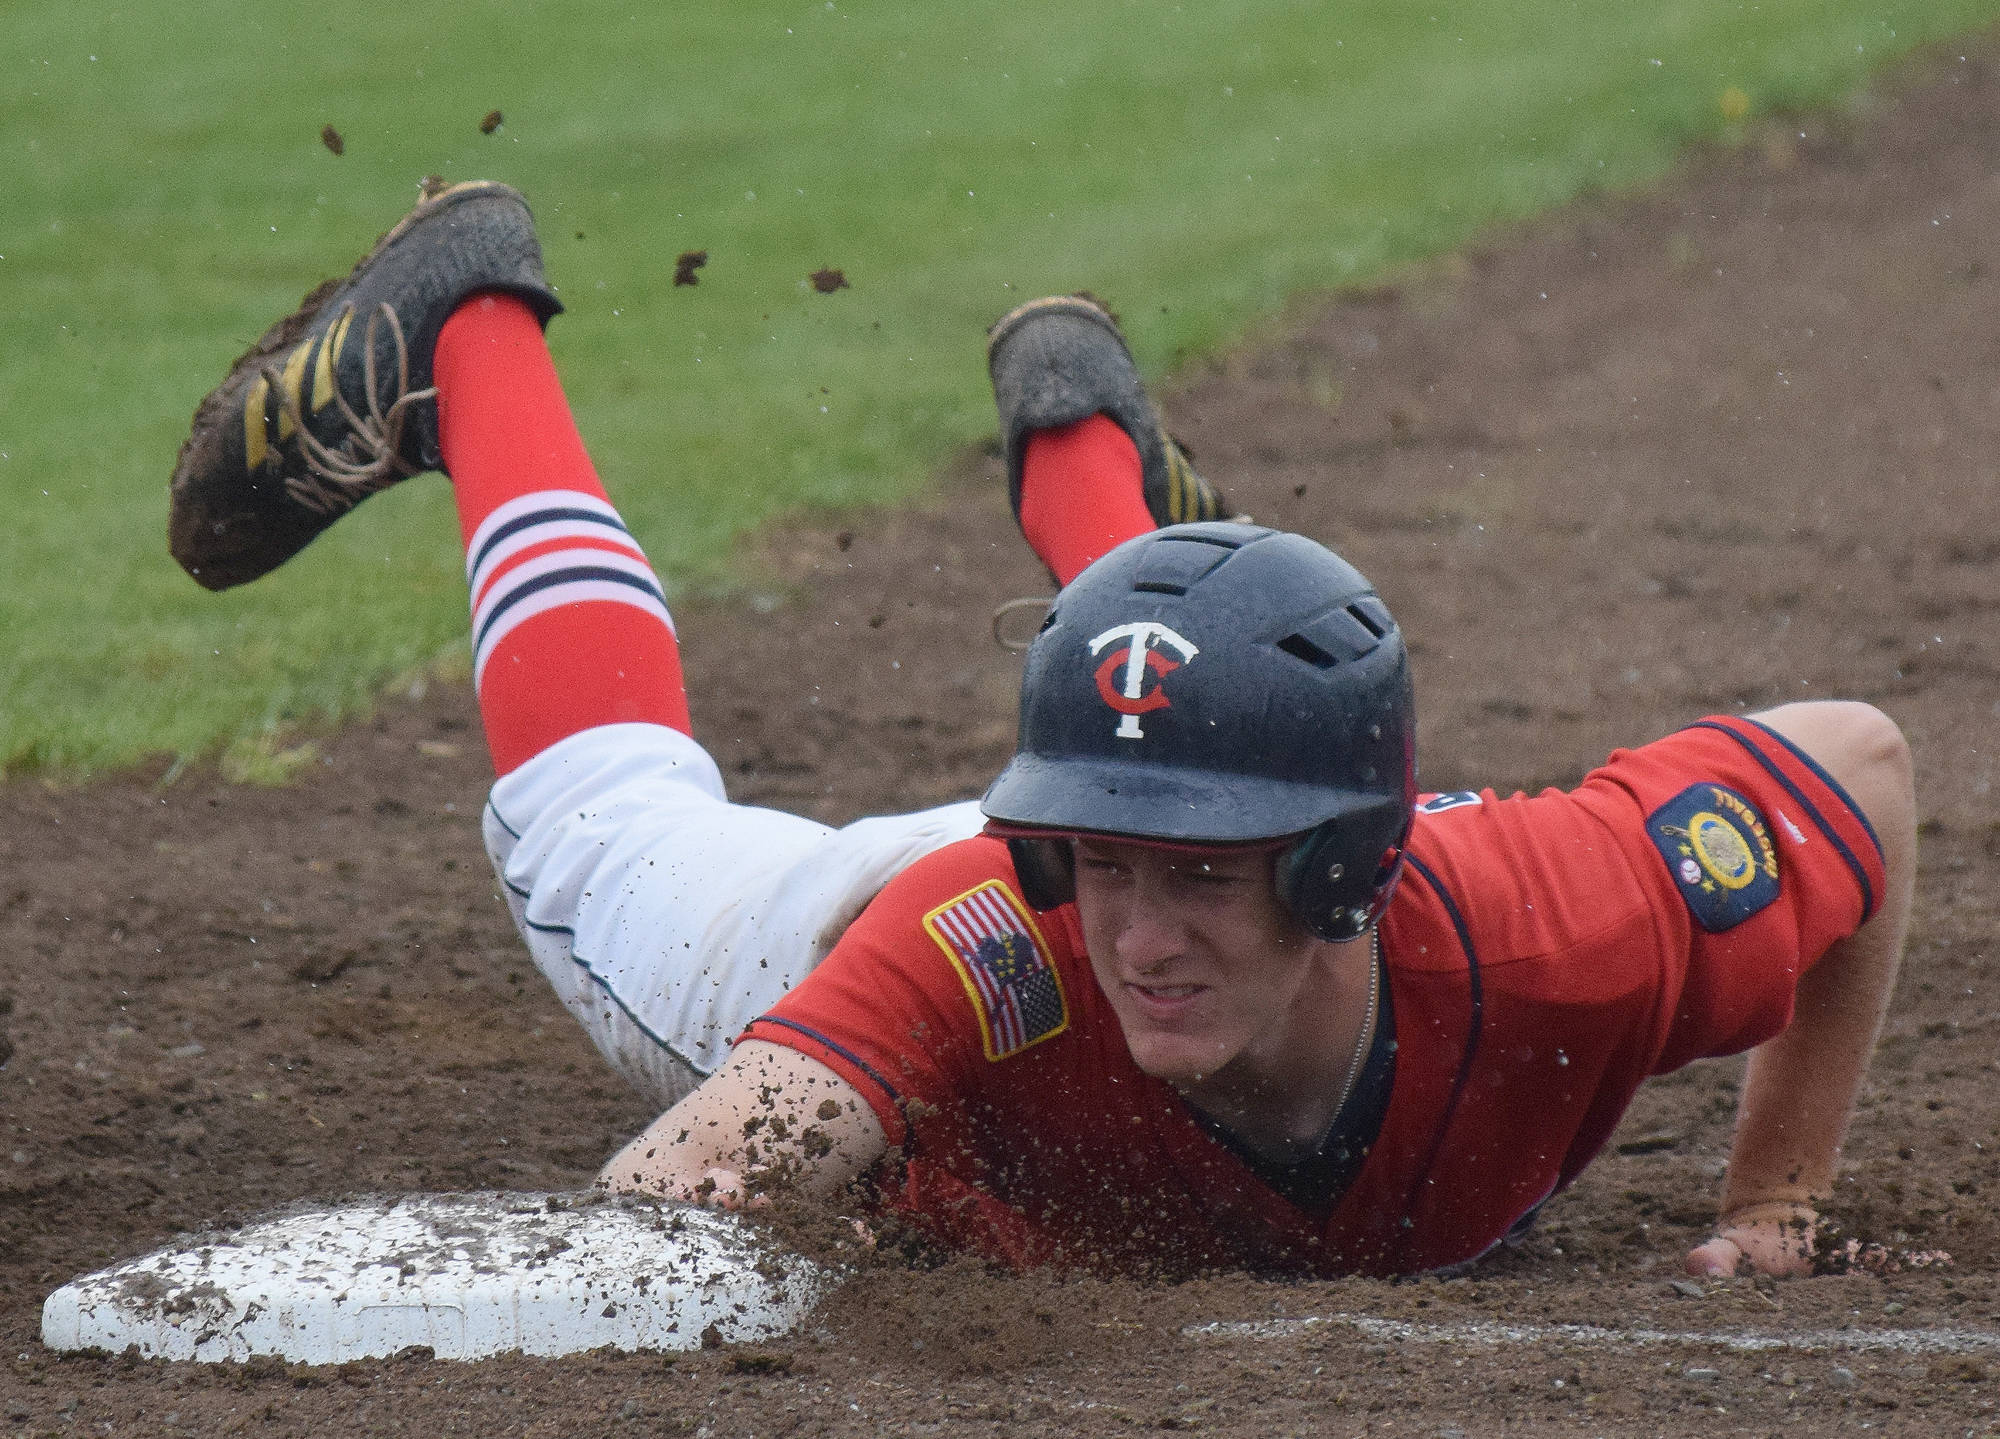 Twins catcher Cody Quelland tags to first base June 15, 2018, against Service at Coral Seymour Memorial Ballpark in Kenai. (Photo by Joey Klecka/Peninsula Clarion)